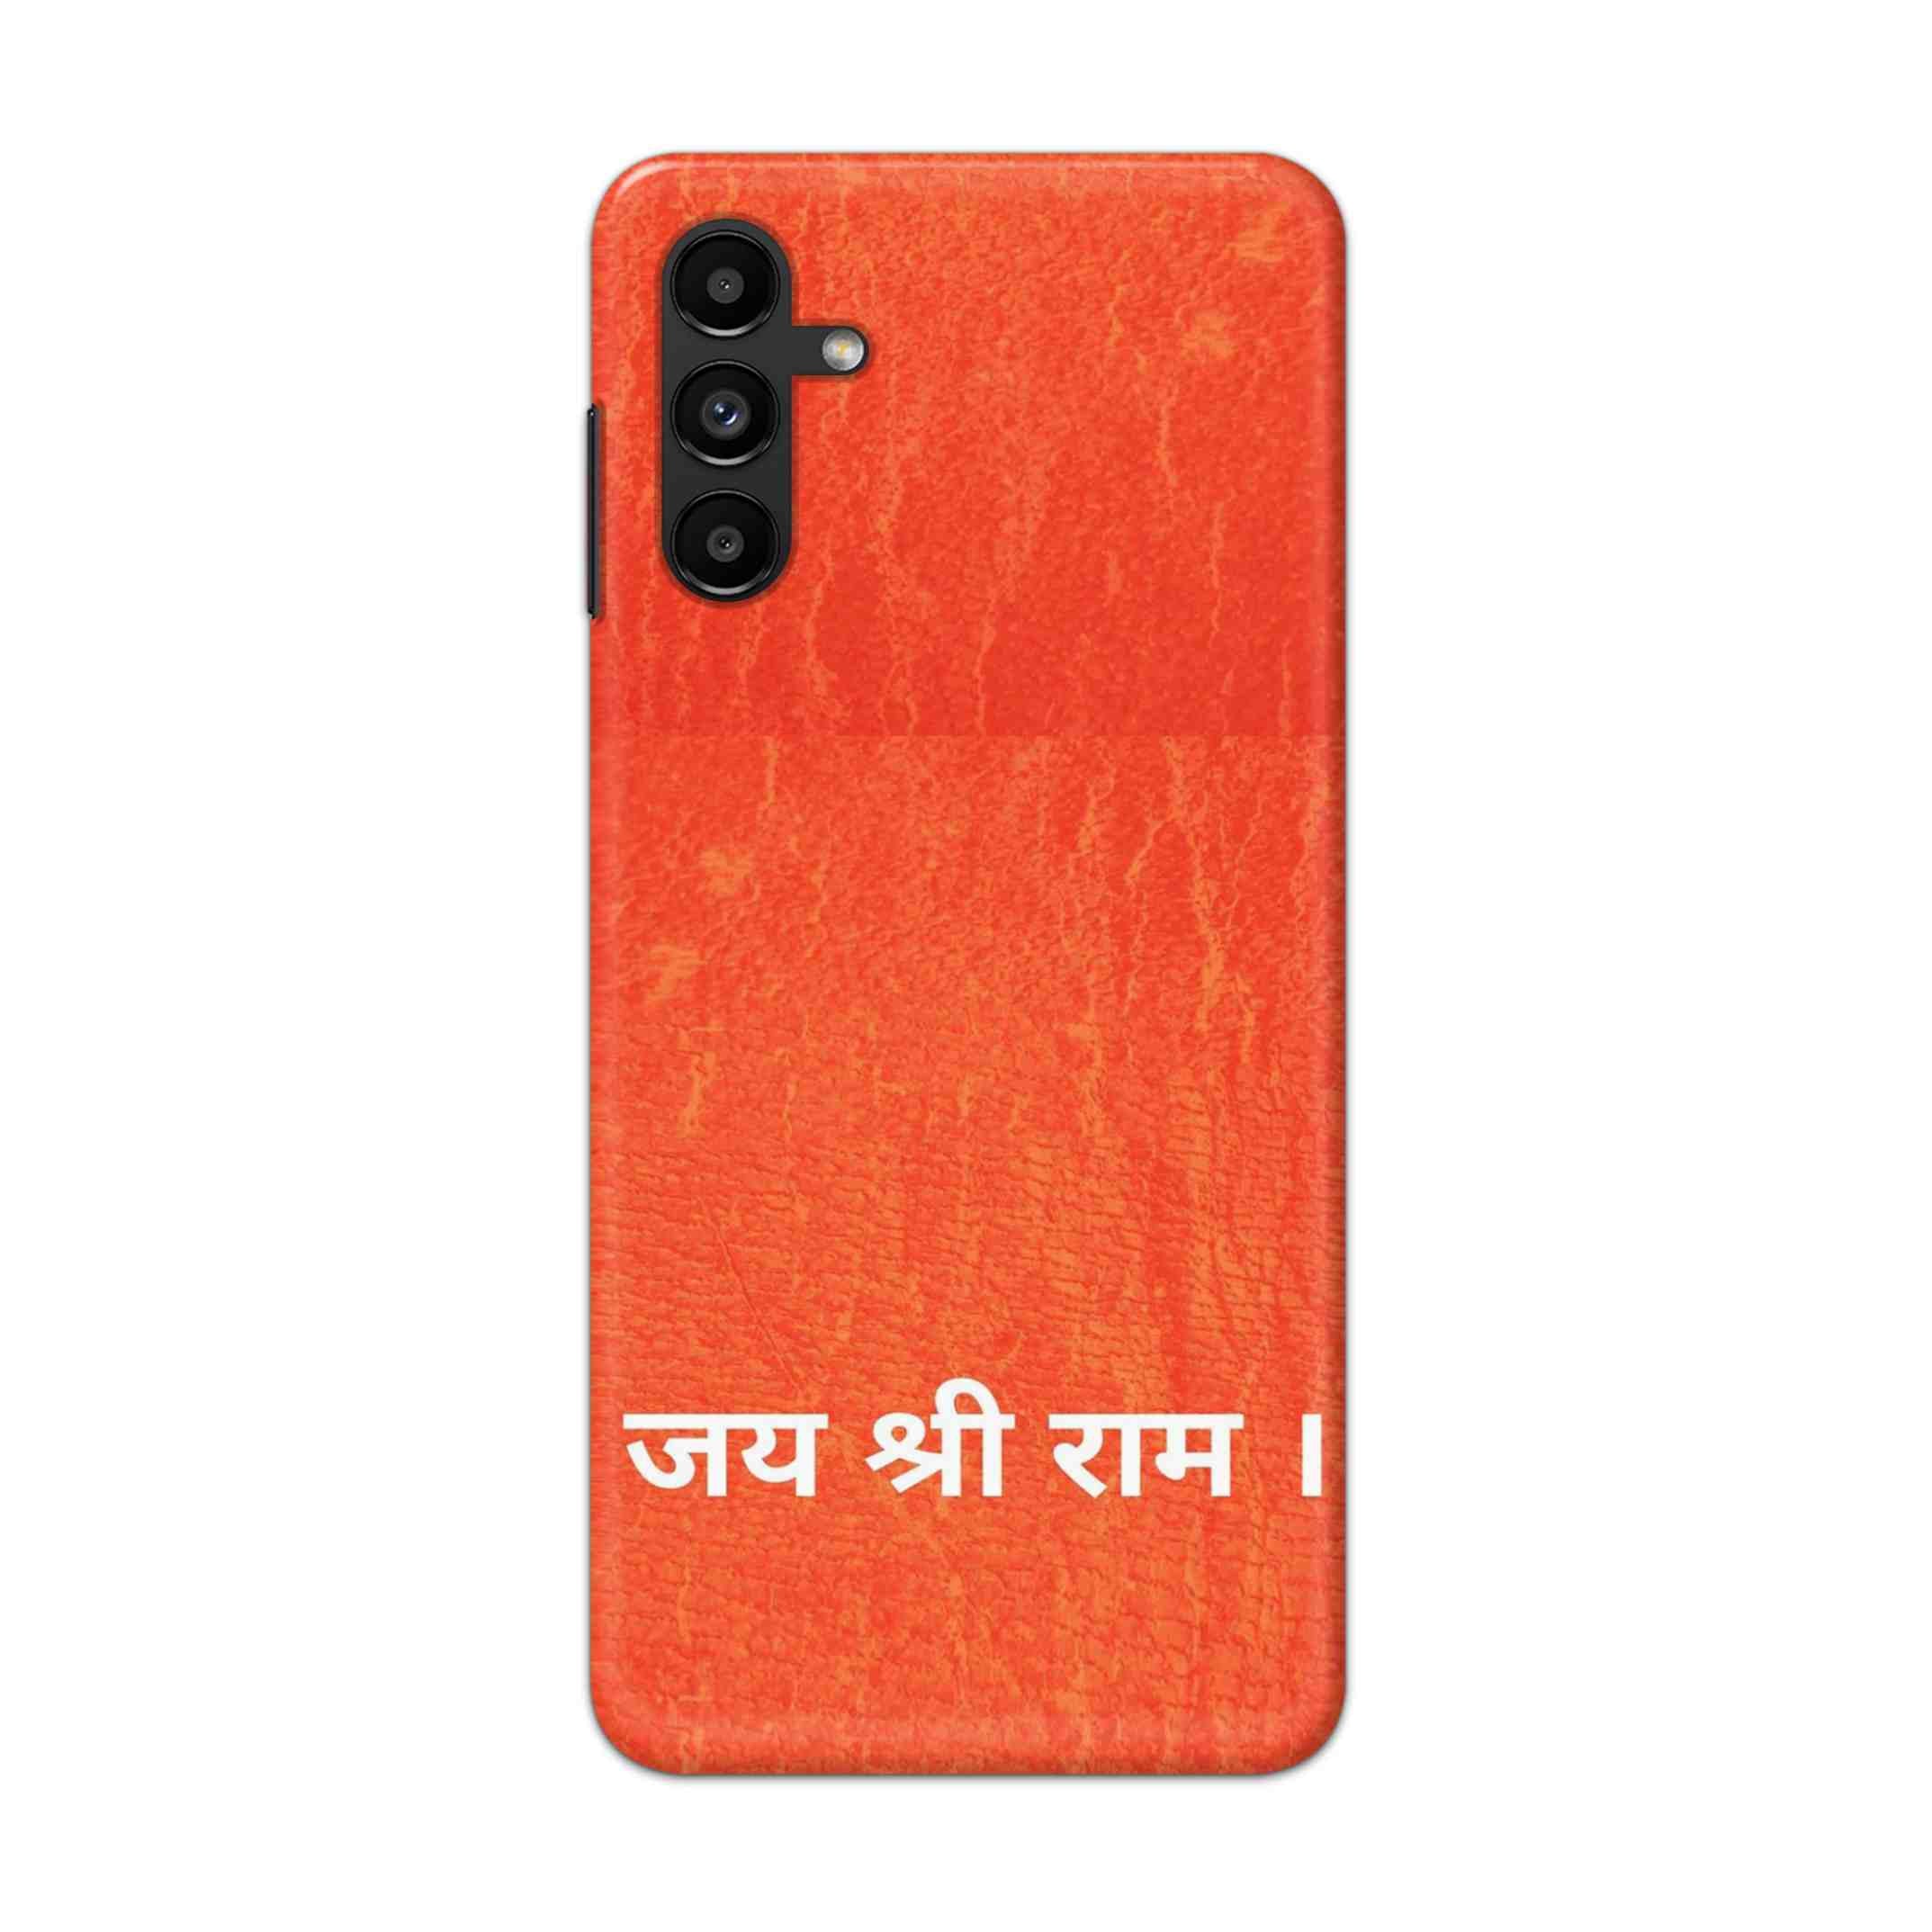 Buy Jai Shree Ram Hard Back Mobile Phone Case/Cover For Galaxy A13 (5G) Online